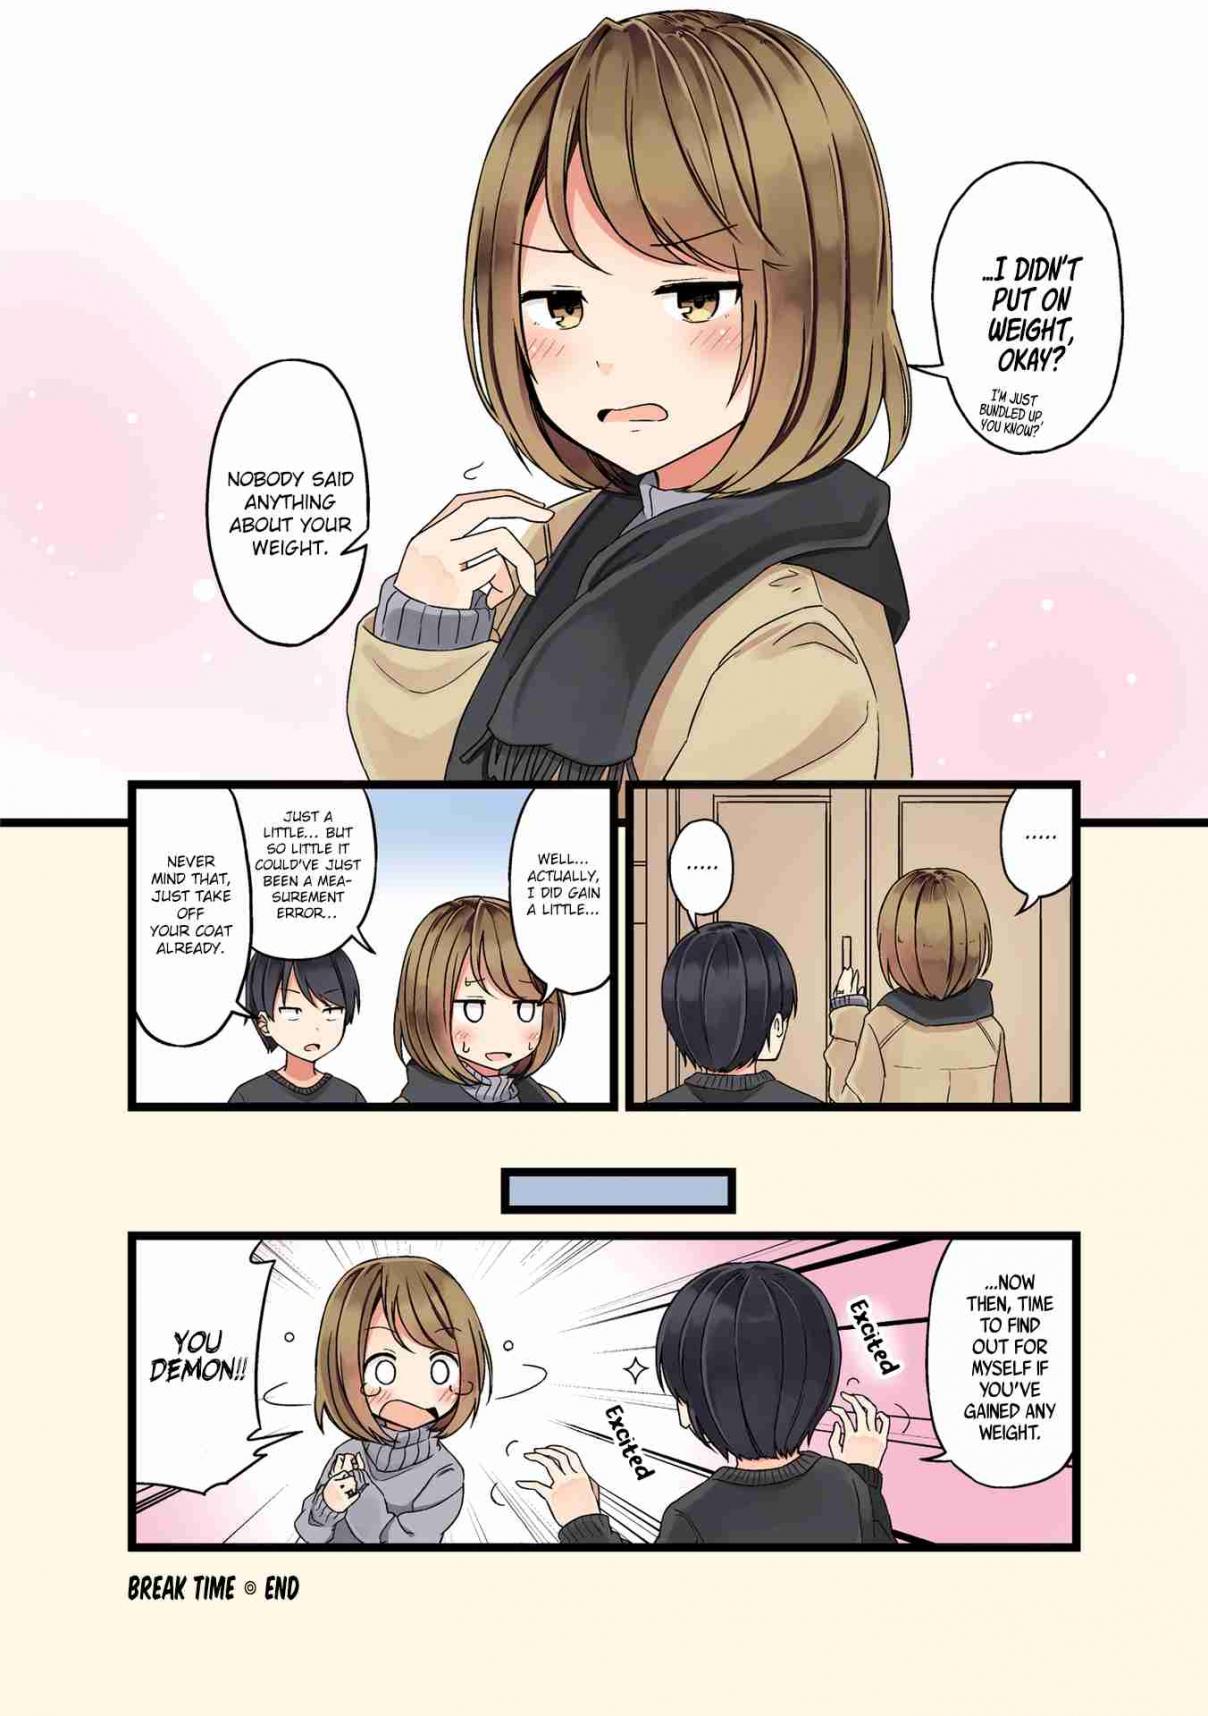 First Comes Love, Then Comes Marriage Vol. 1 Ch. 10.5 My Fiance Came Home From New Year's Break At Her Parents' All Bundled Up